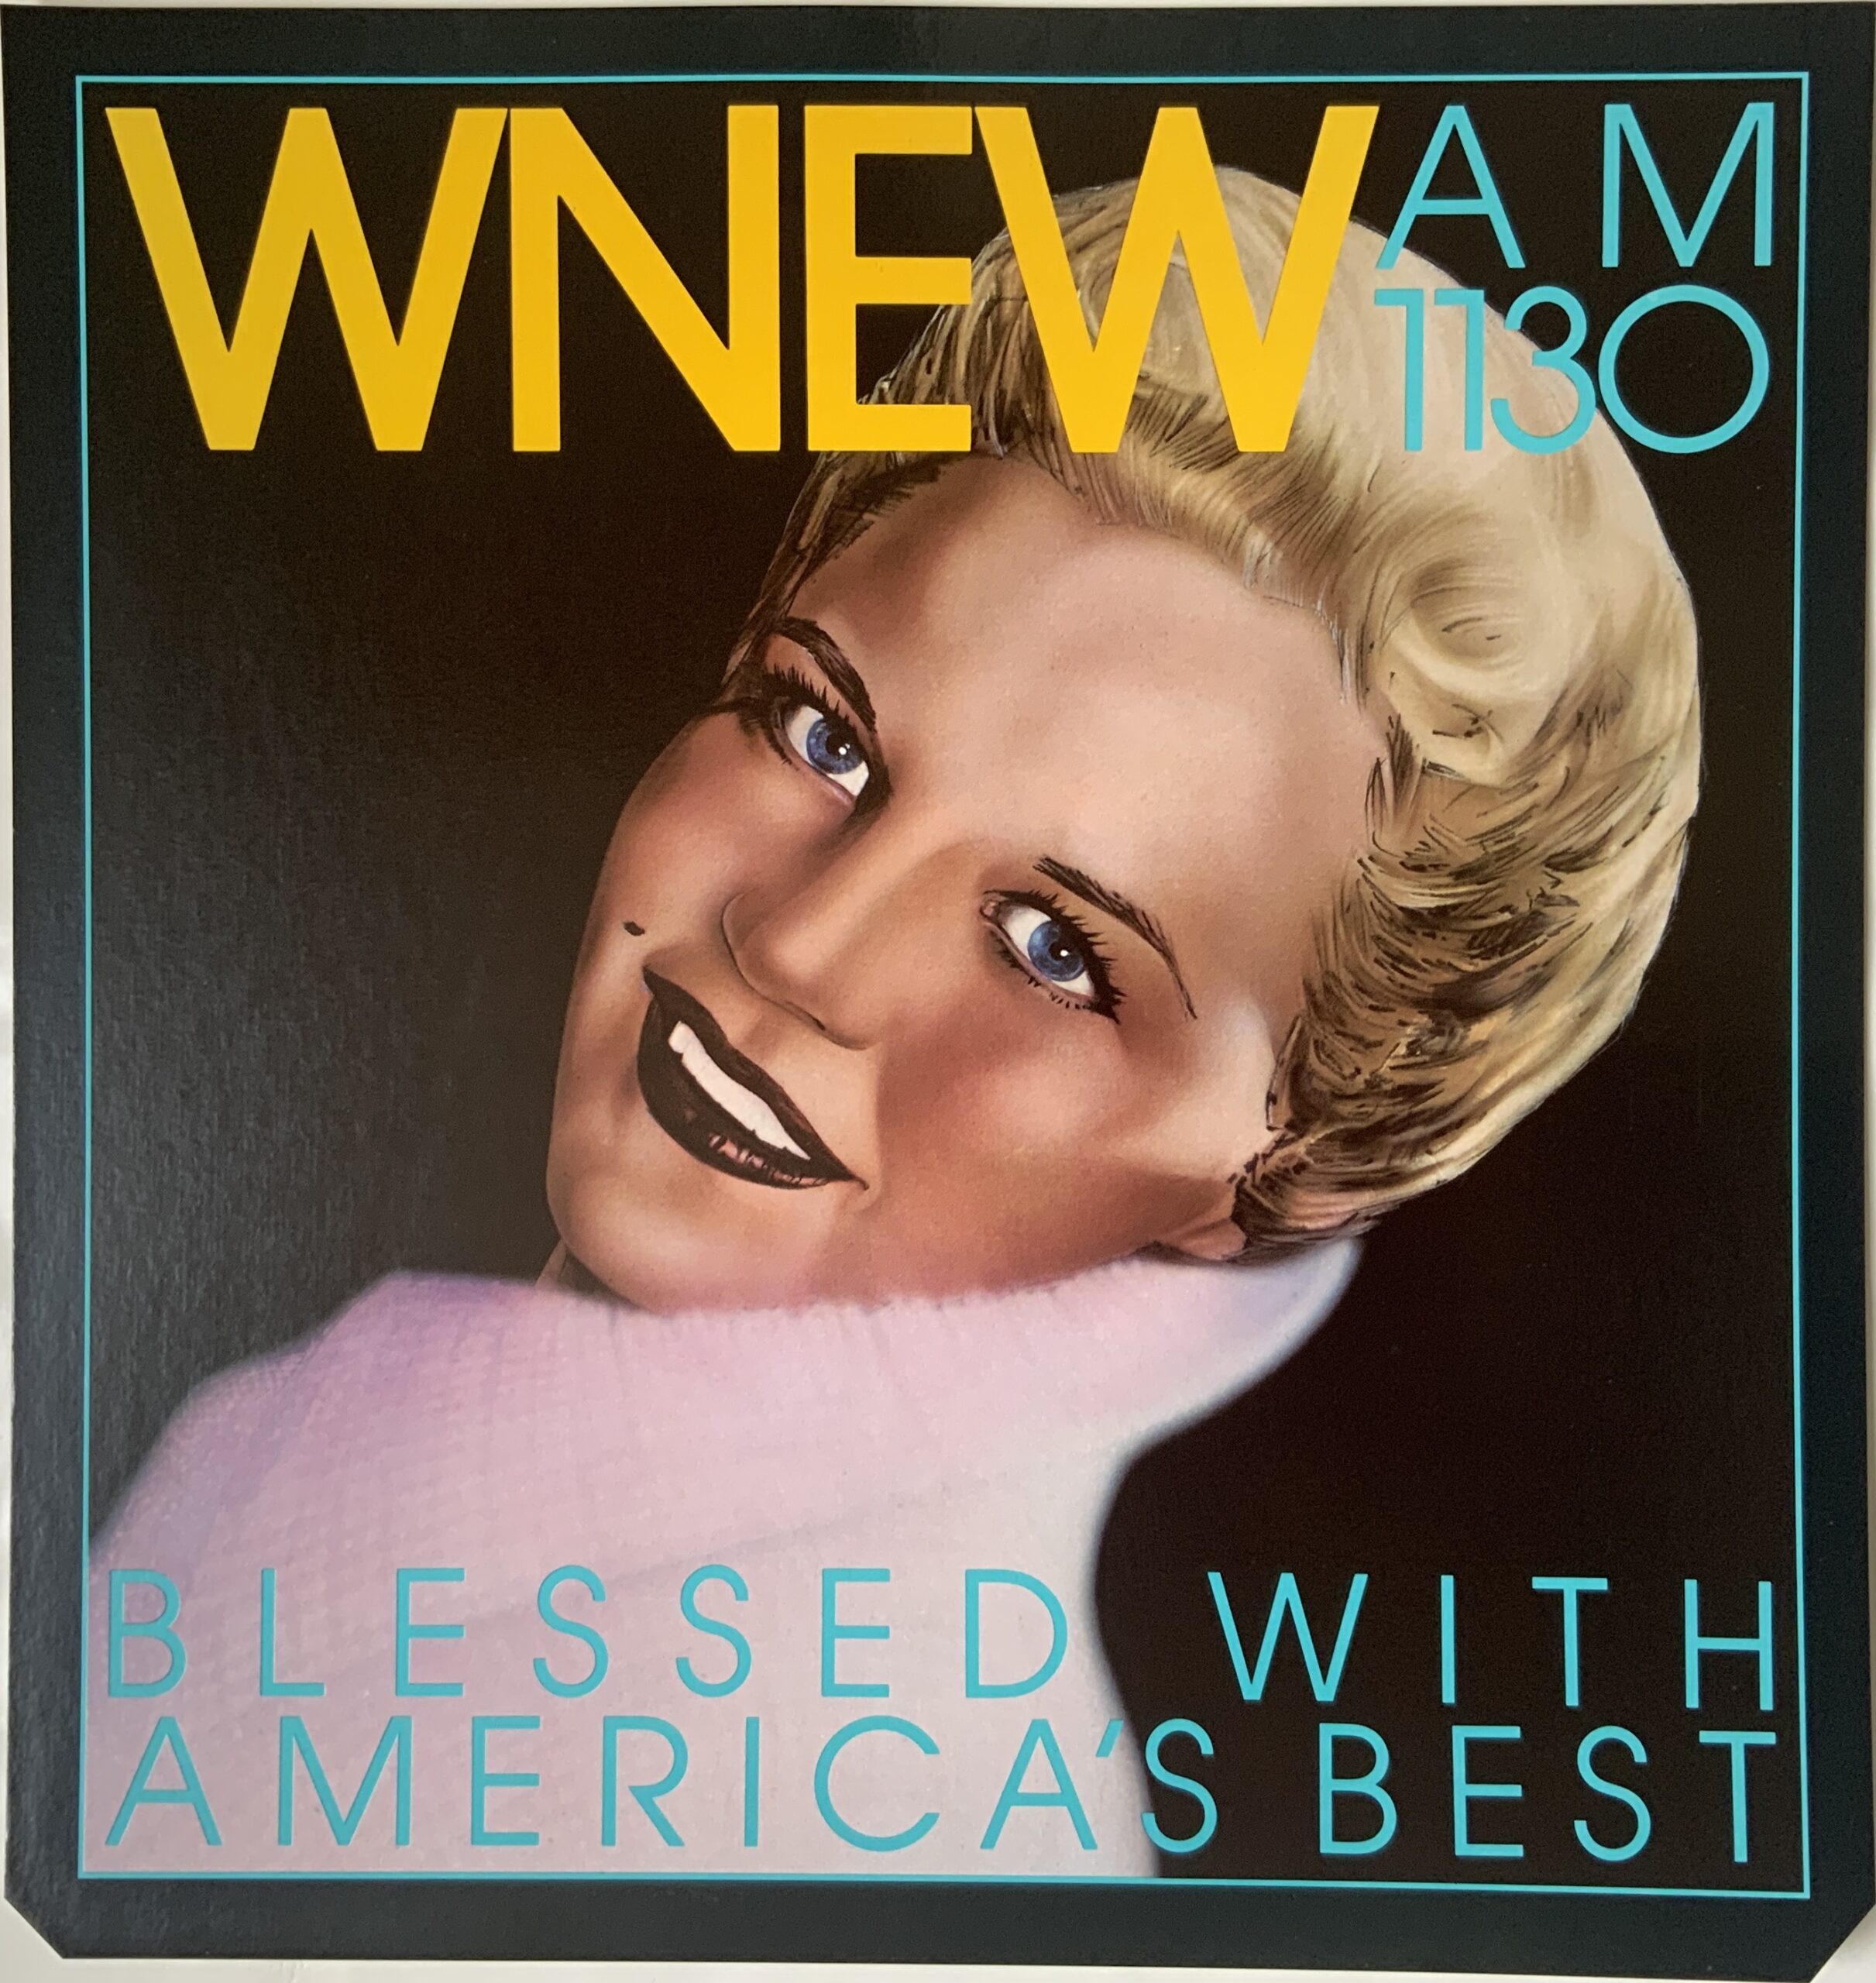 M641	WNEW AM 1130: BLESSED WITH AMERICA’S BEST - PEGGY LEE - SUBWAY POSTER CA. 1985